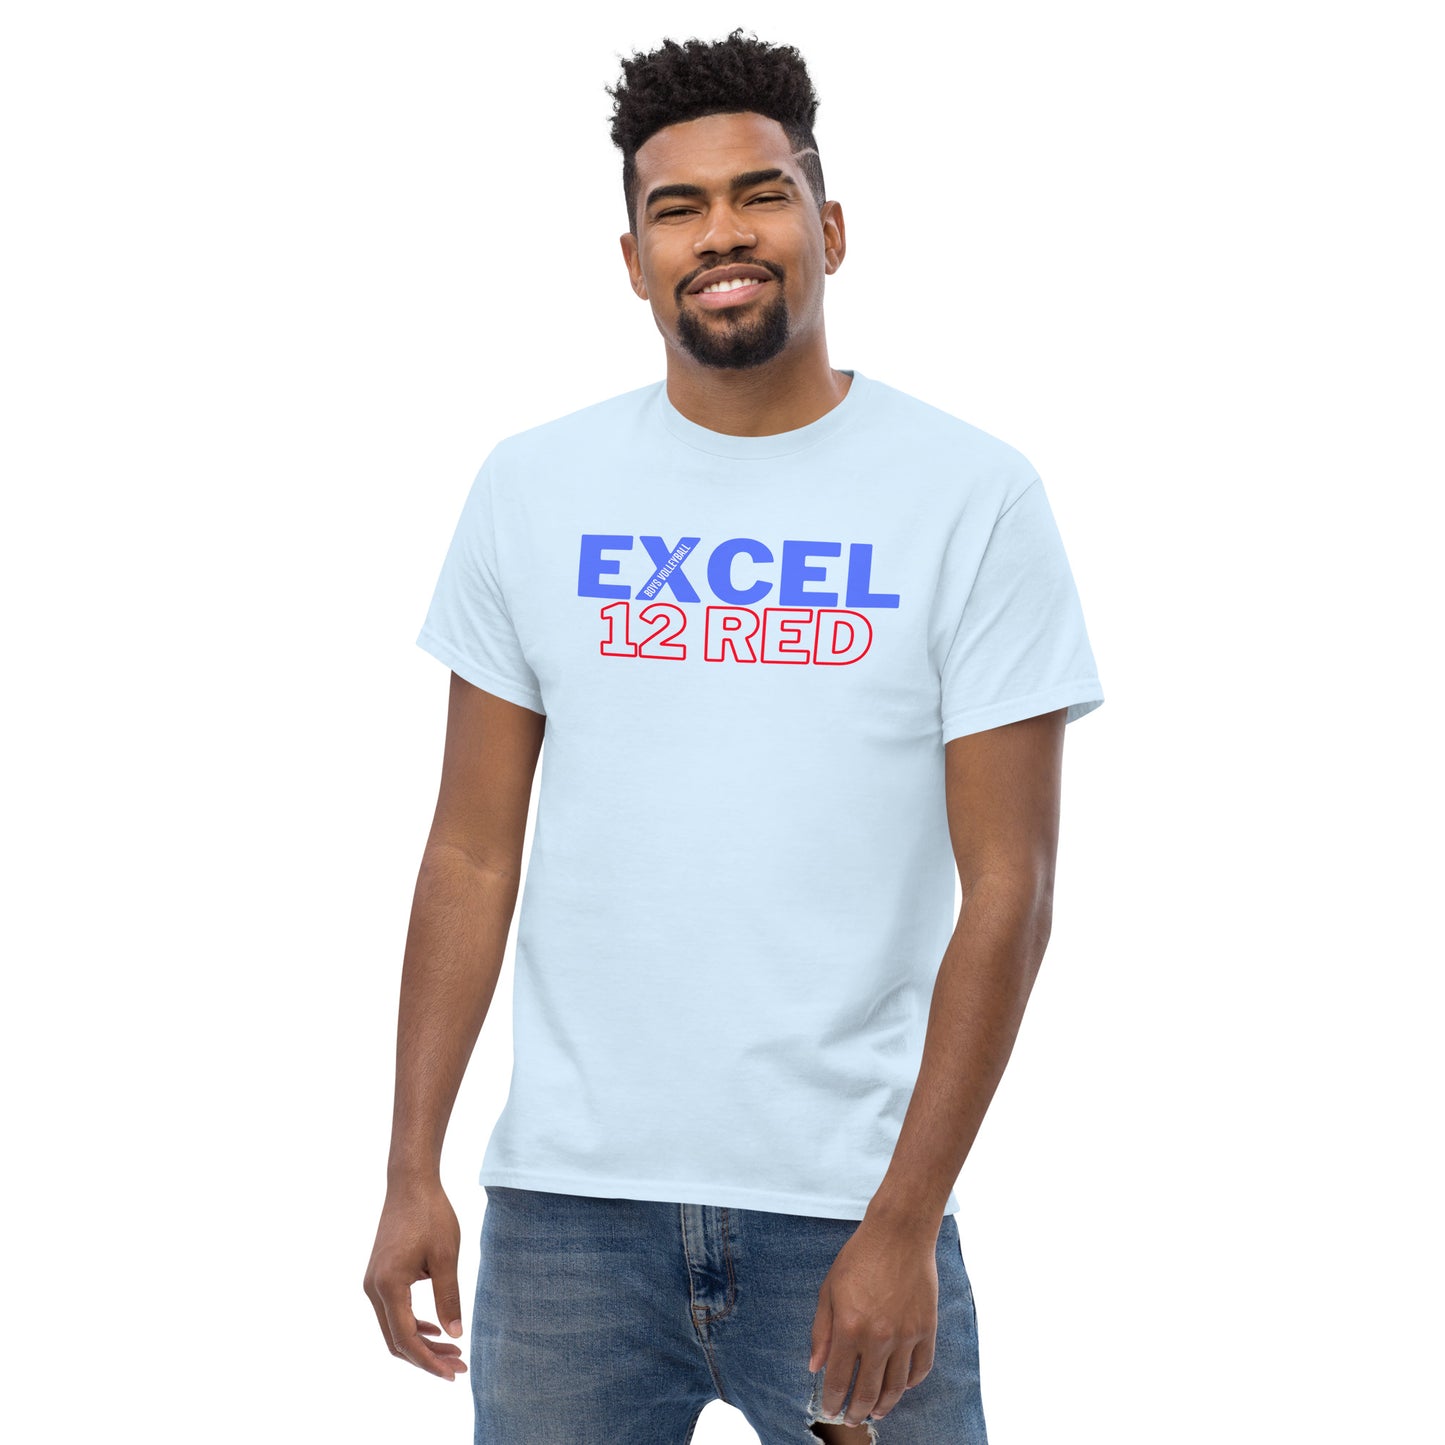 Excel - Boys Volleyball - 12 Red - Men's classic tee